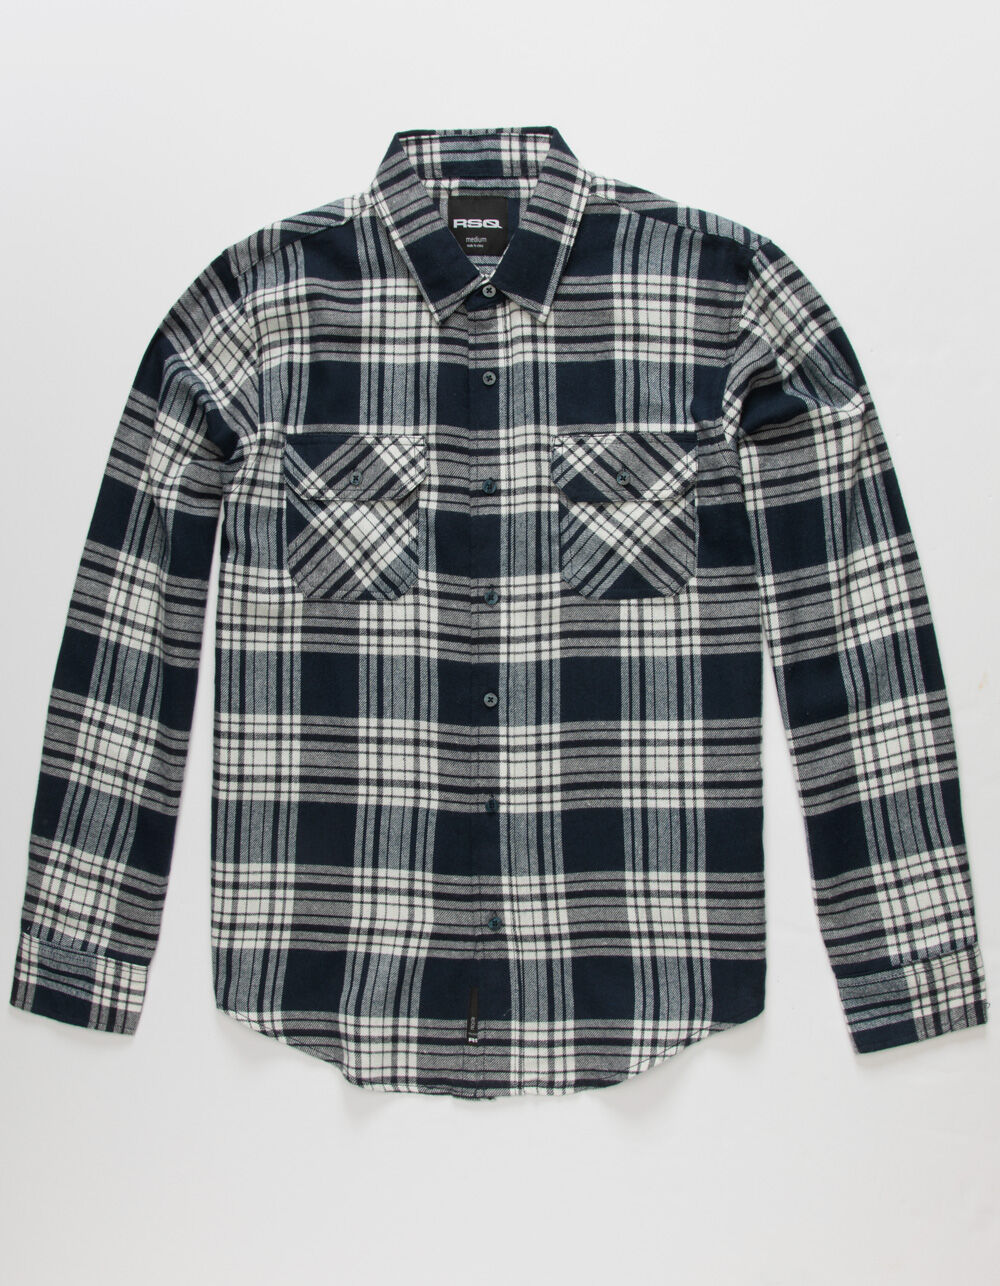 RSQ Mens Plaid Flannel - NAVY/WHITE | Tillys